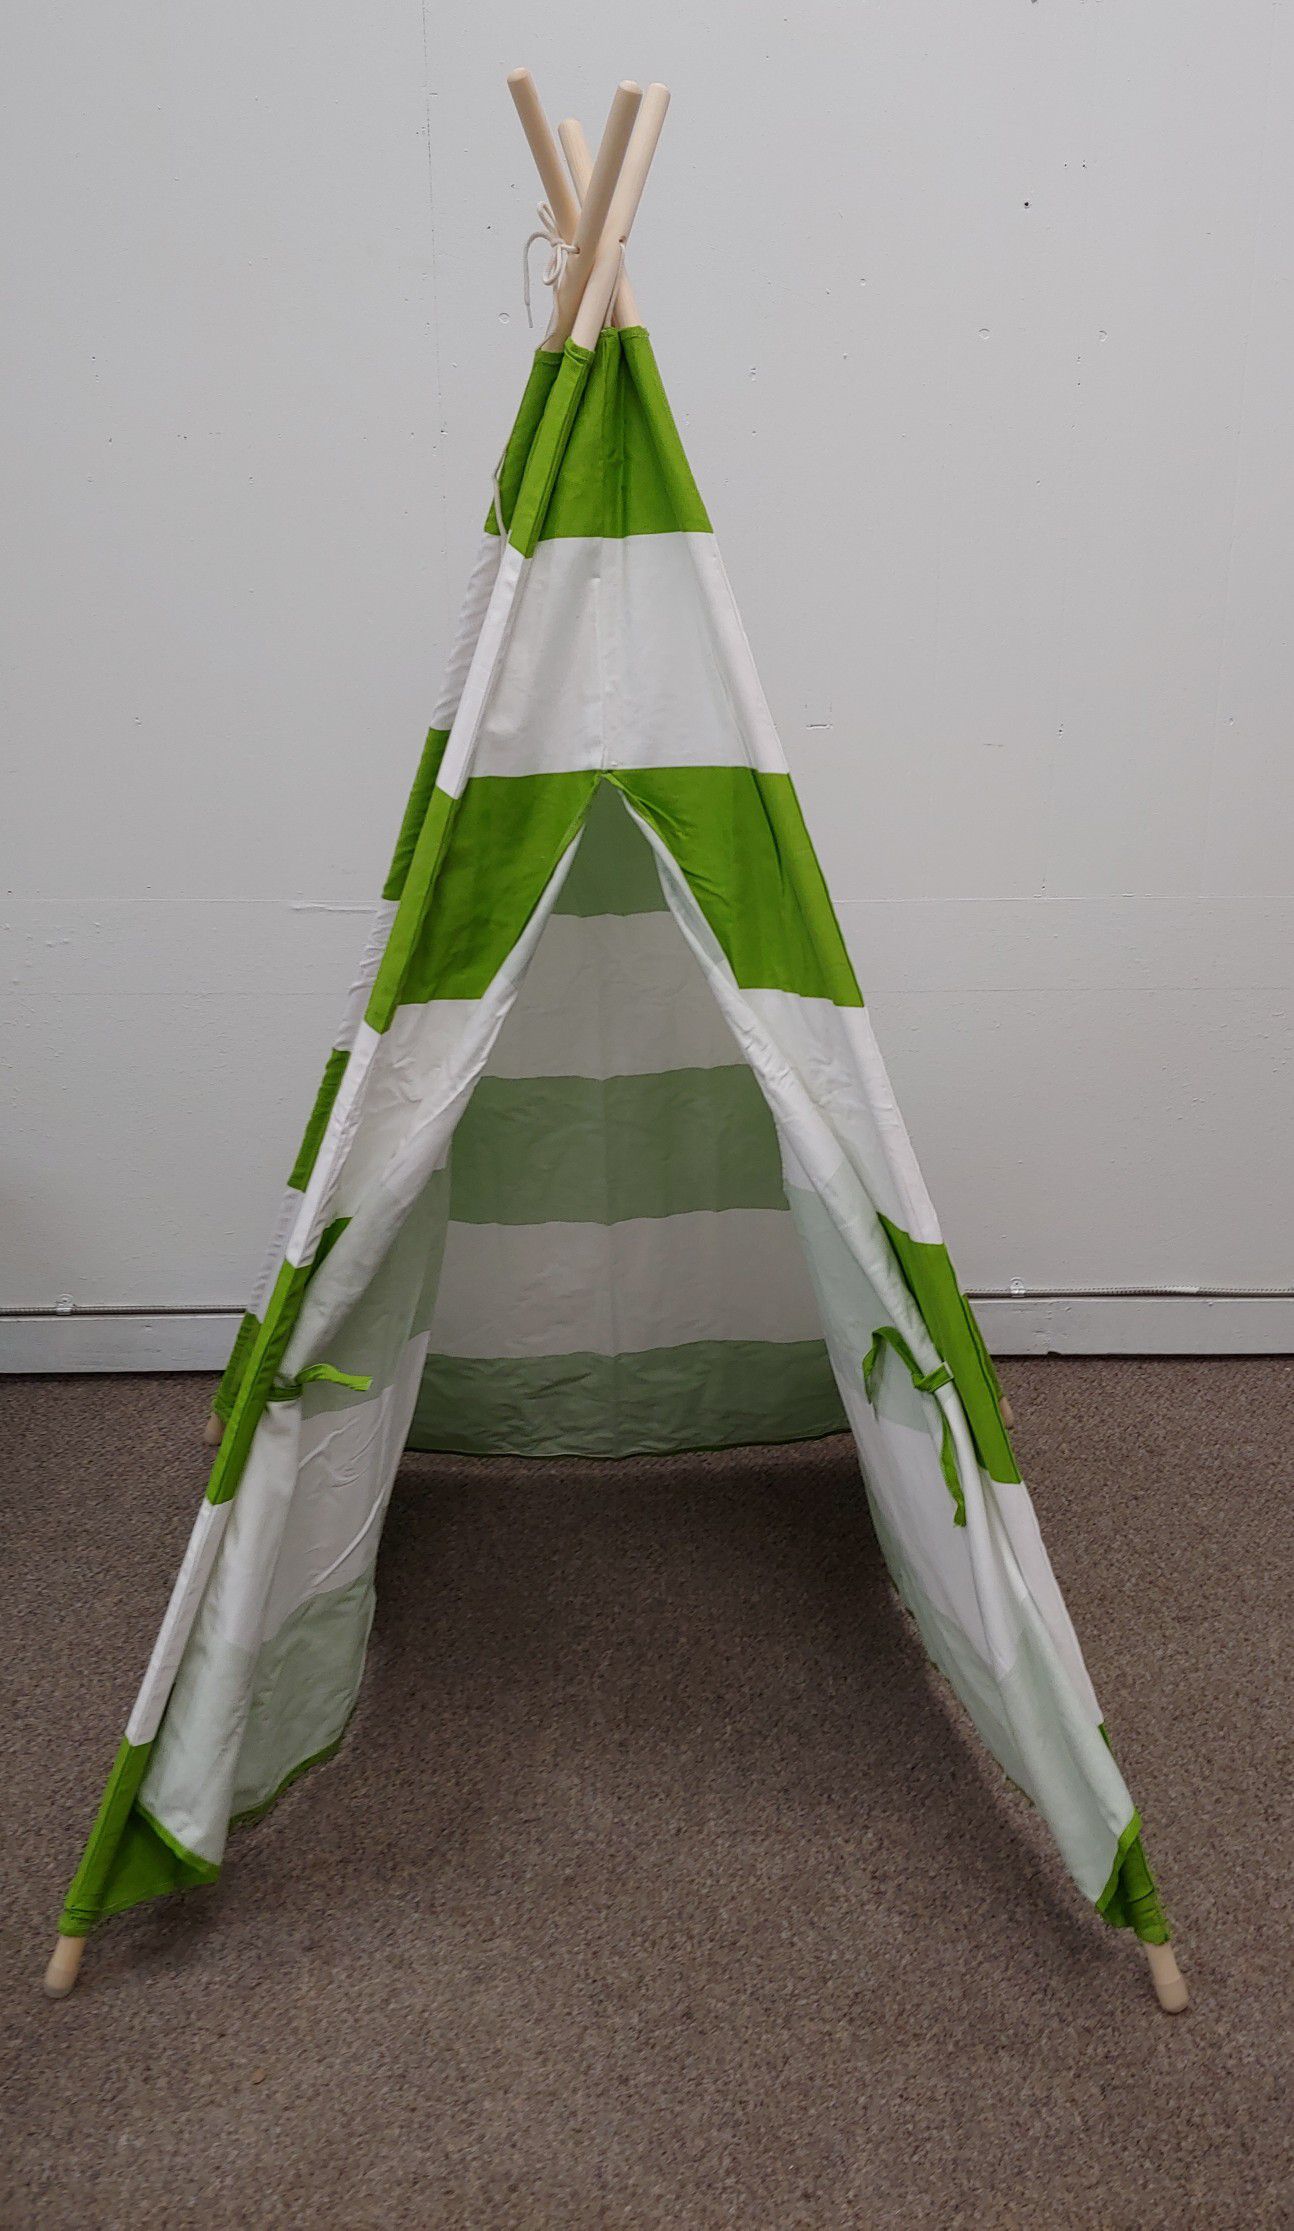 New Pericoss Indoor/Outdoor Tee Pee Green & White Stripe Play Tent Firm Price